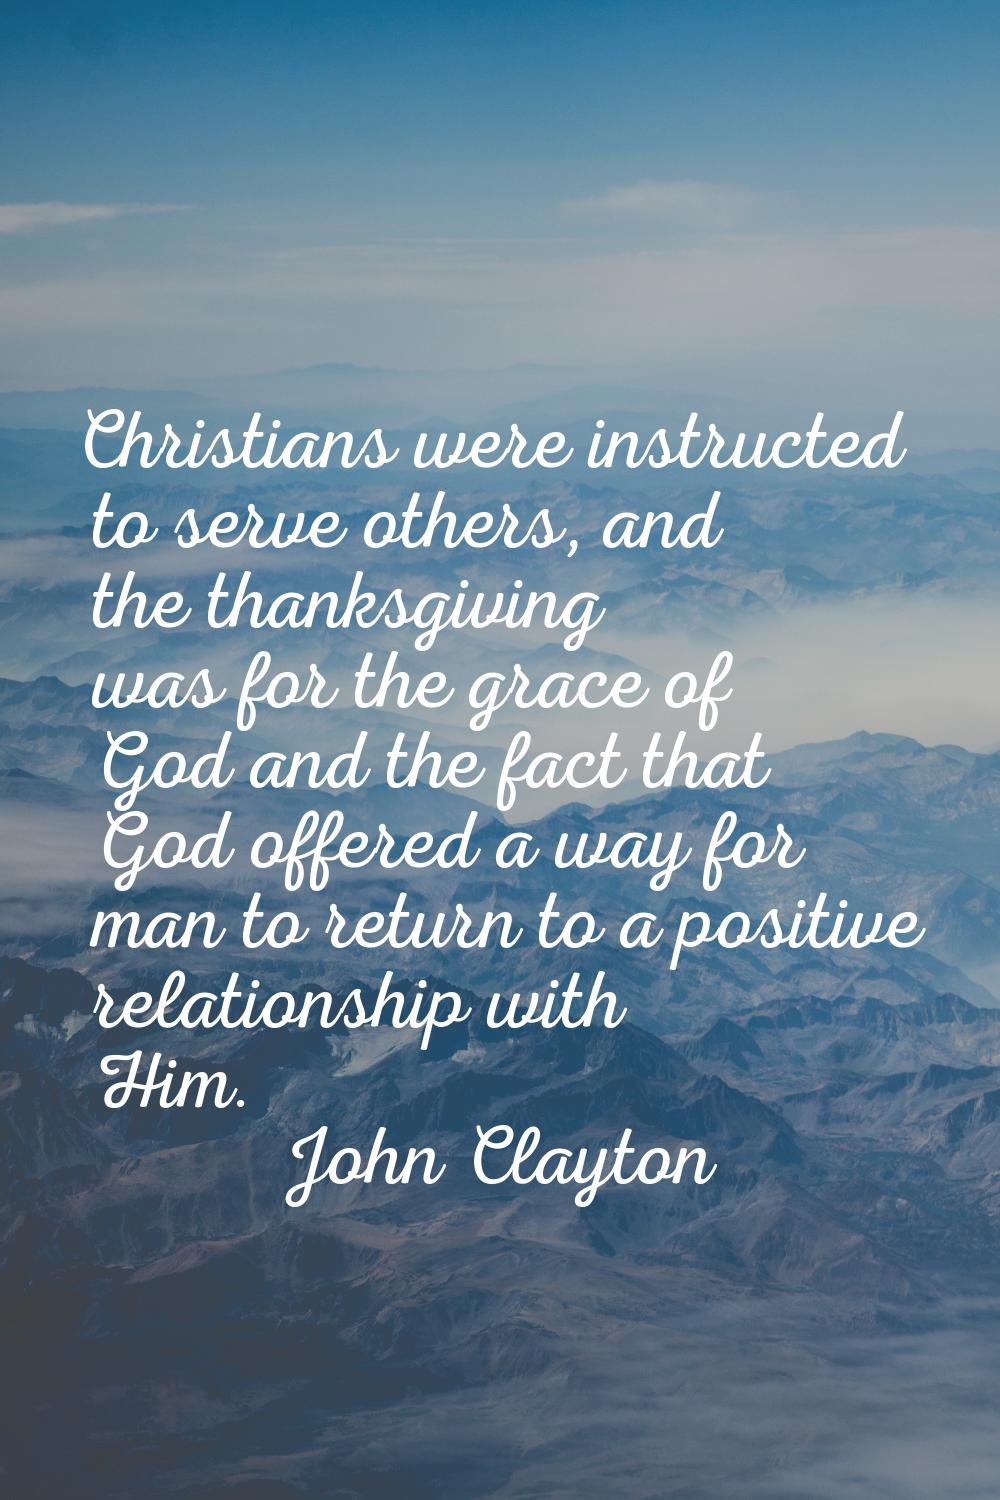 Christians were instructed to serve others, and the thanksgiving was for the grace of God and the f